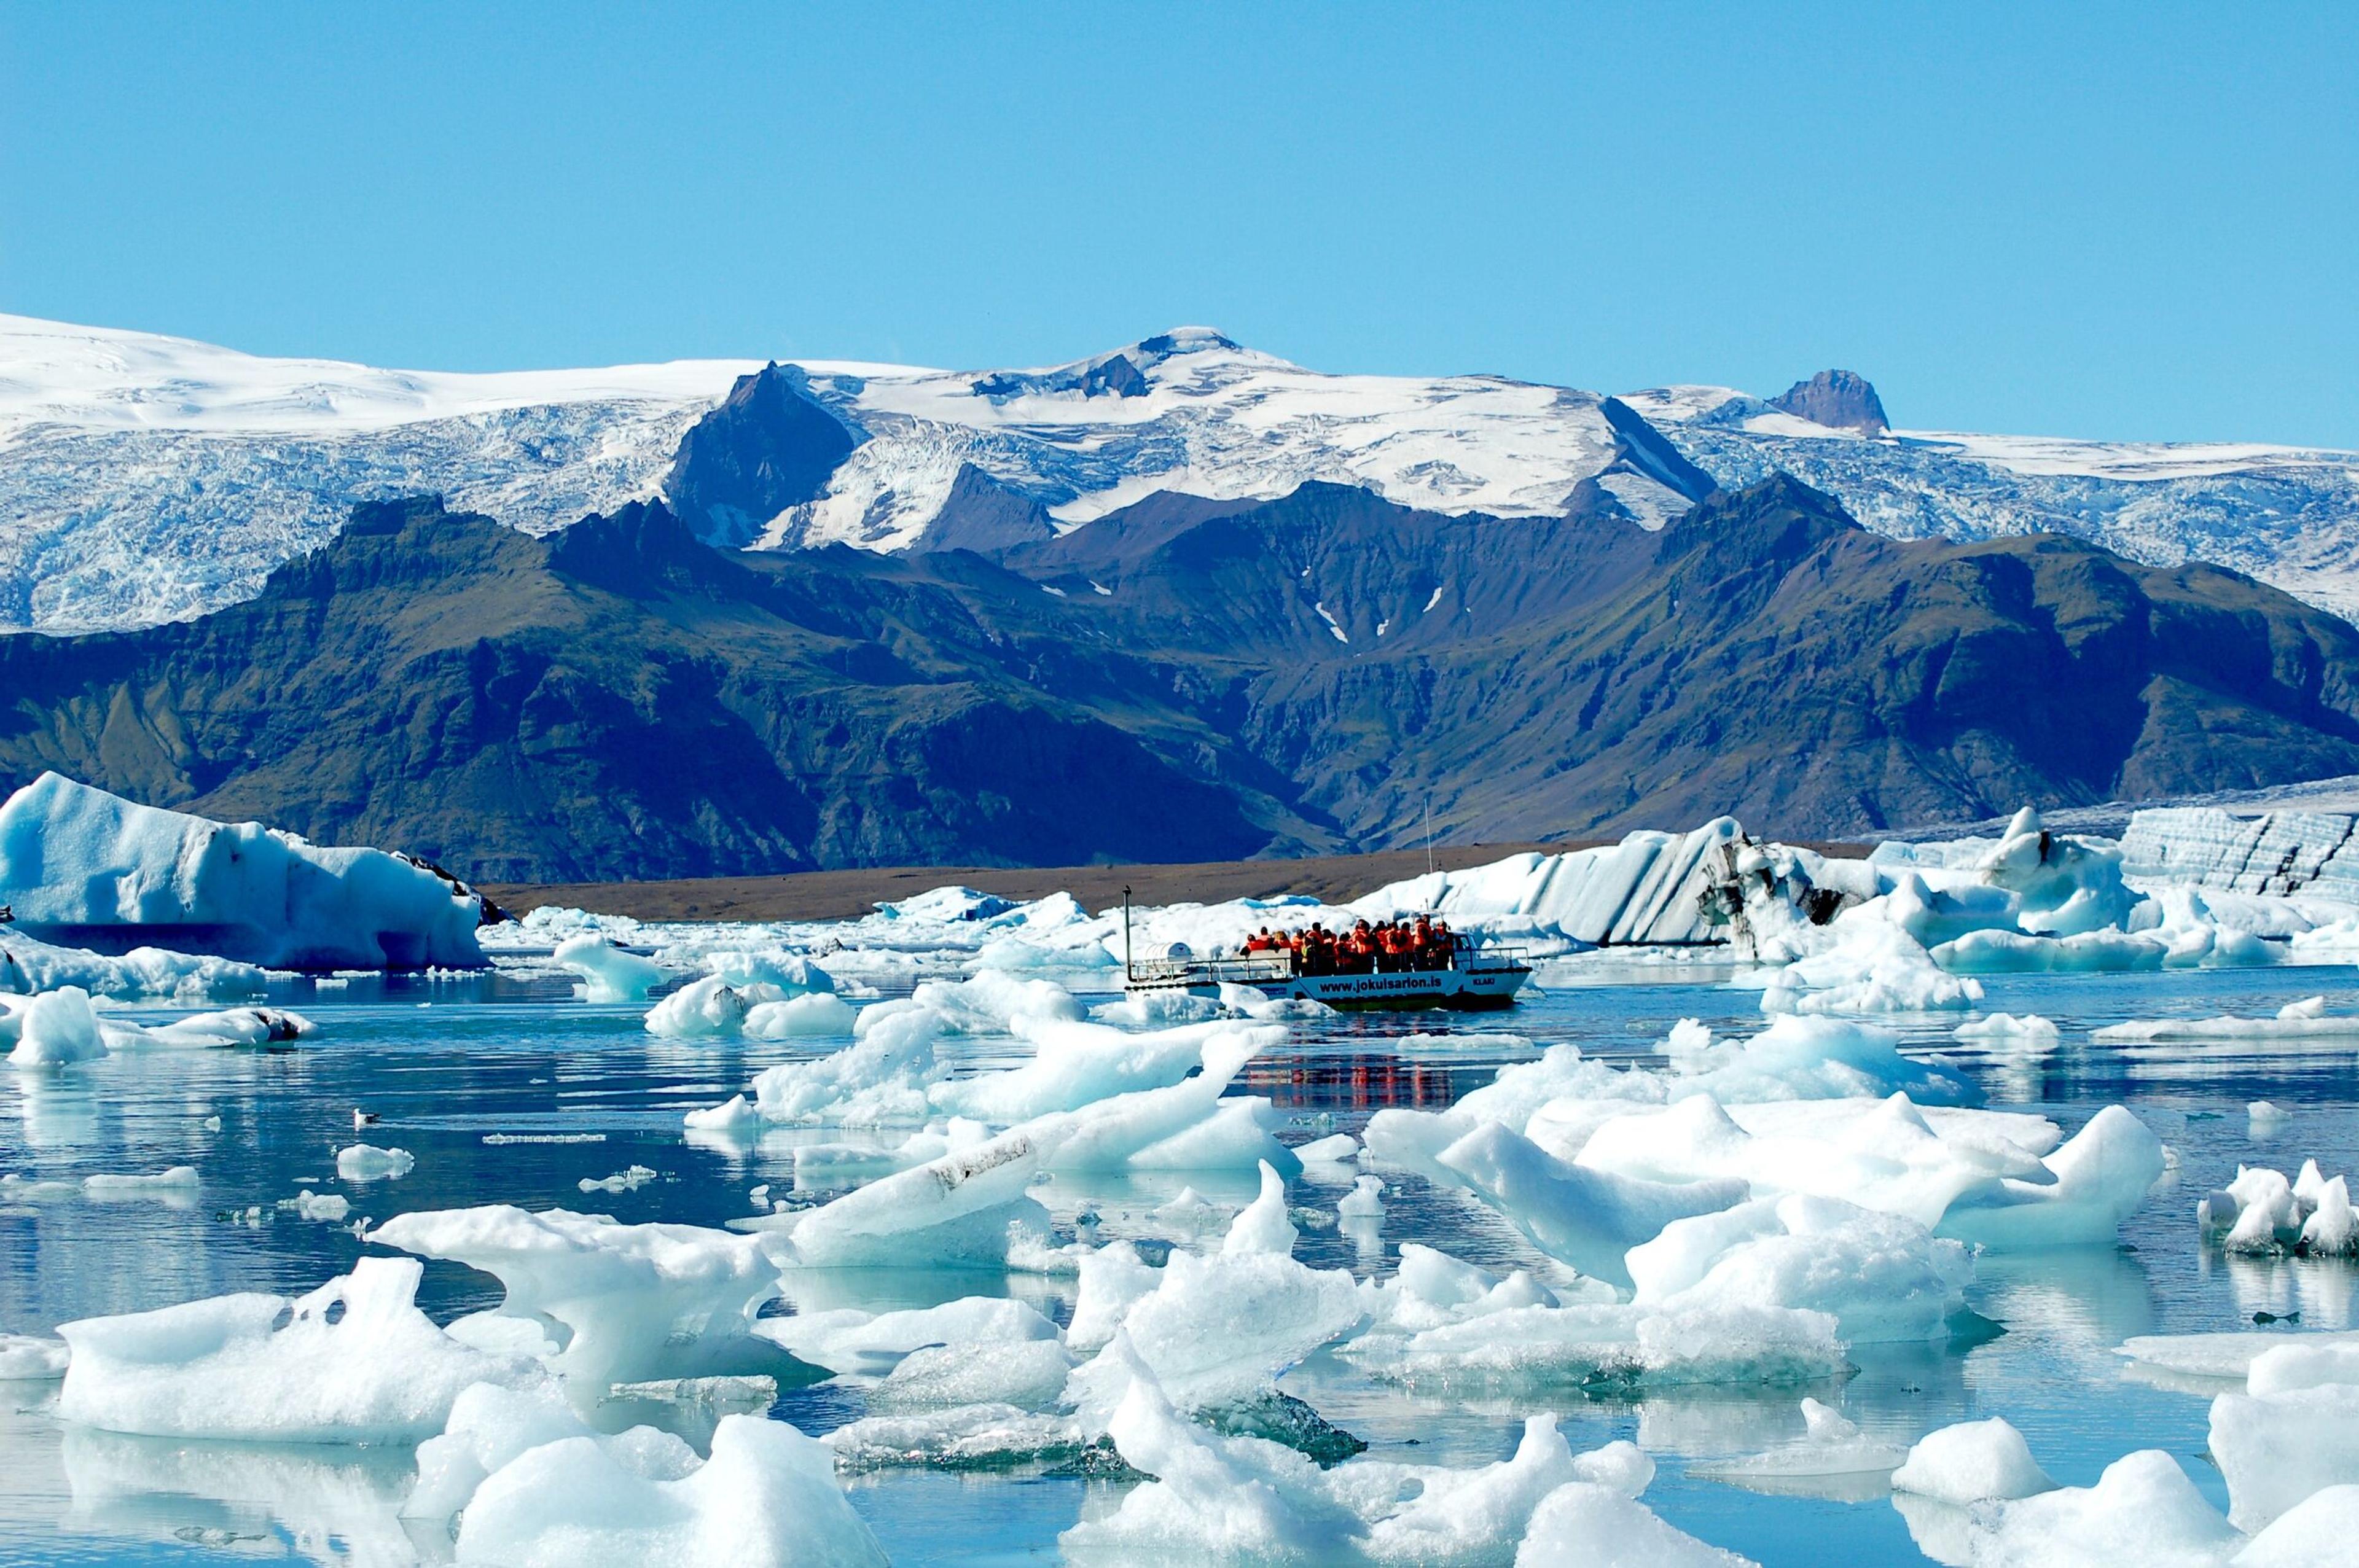 An amphibious boat floating among blue icebergs on a lake, with glacier-topped mountains in the background